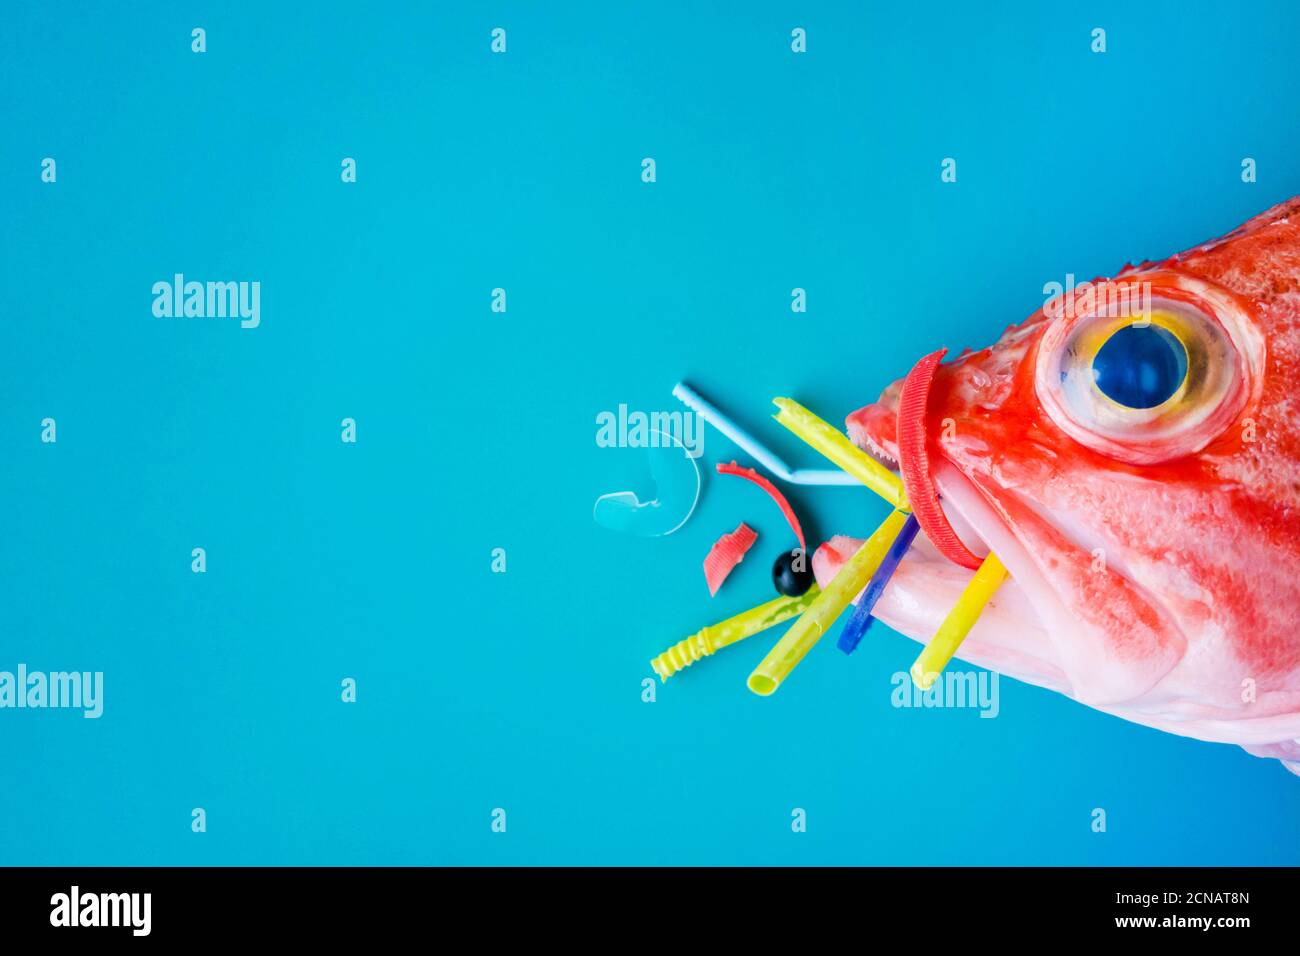 Red fish (Blackbelly Rosefish) on a blue background, eats plastics and microplastics. Concept of pollution in the oceans. Stock Photo